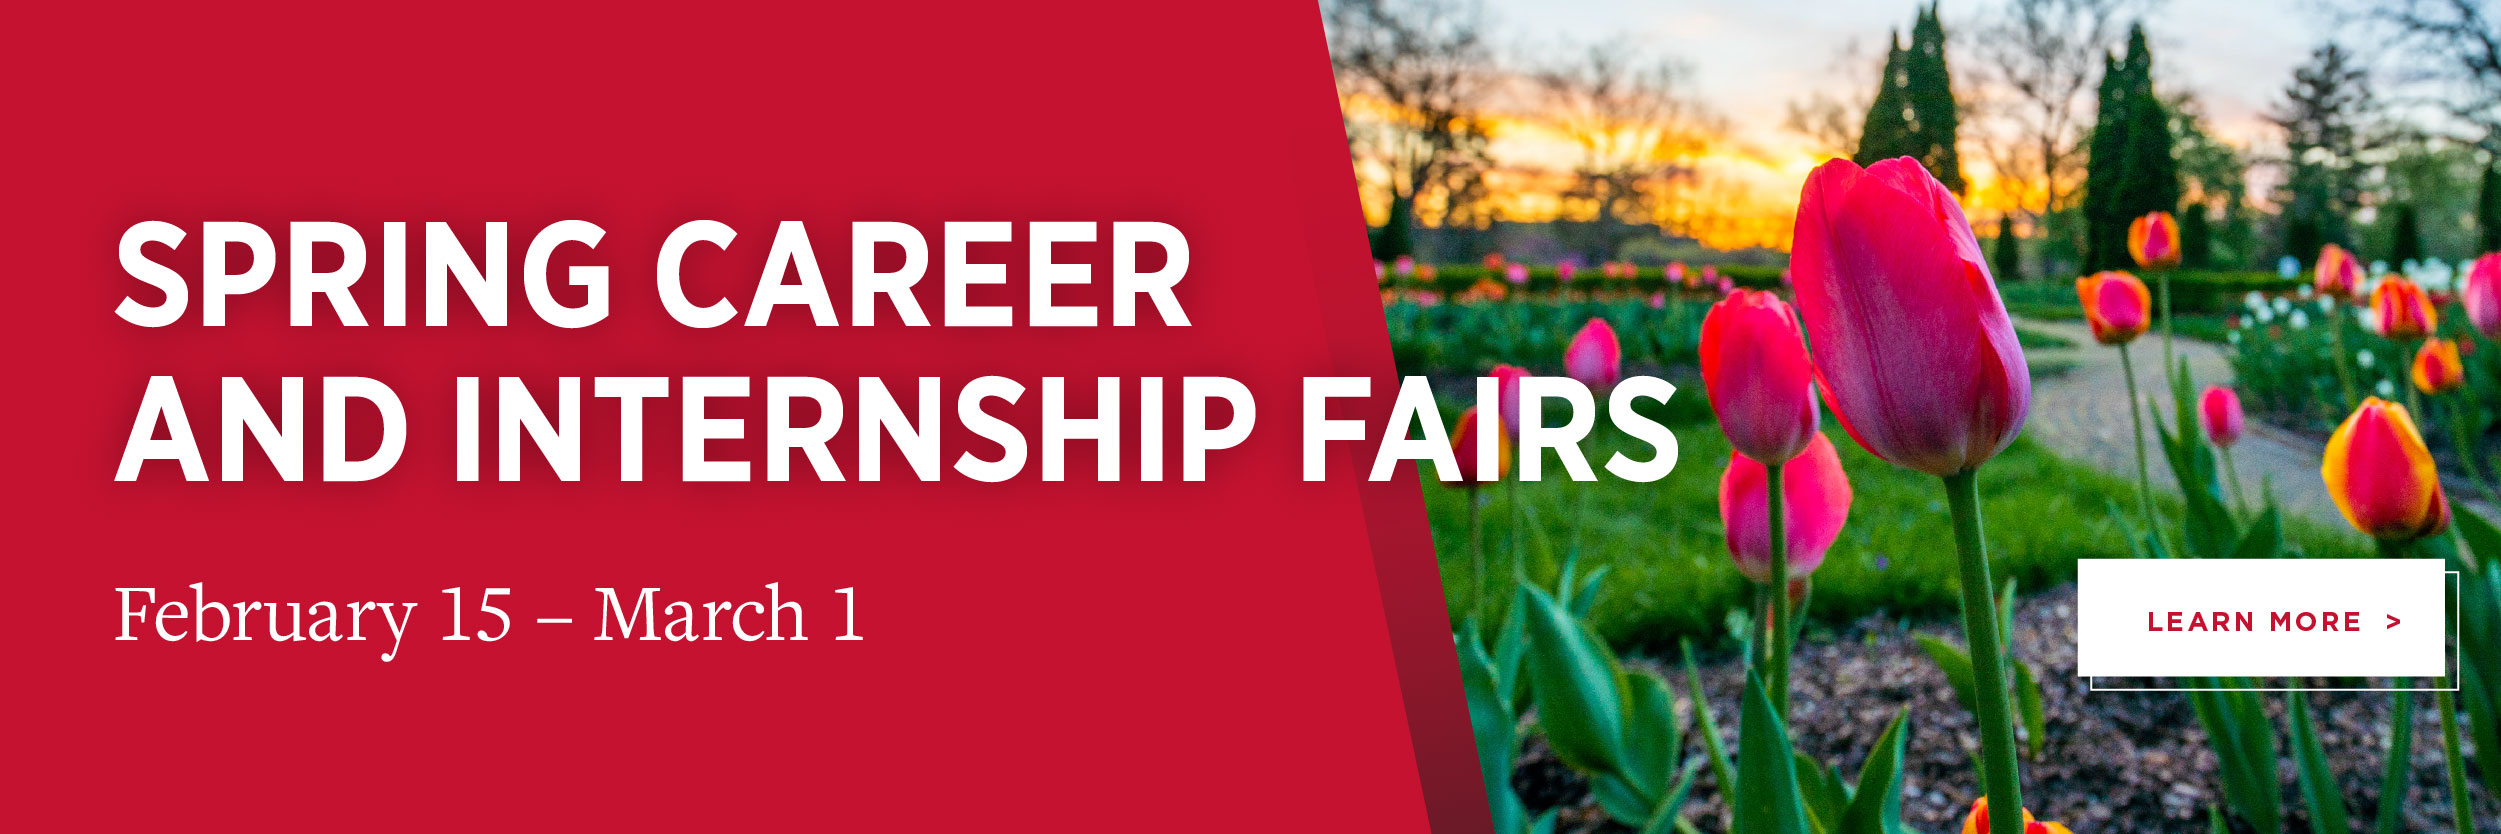  Spring Career and Internship Fairs from February 15 through March 1 